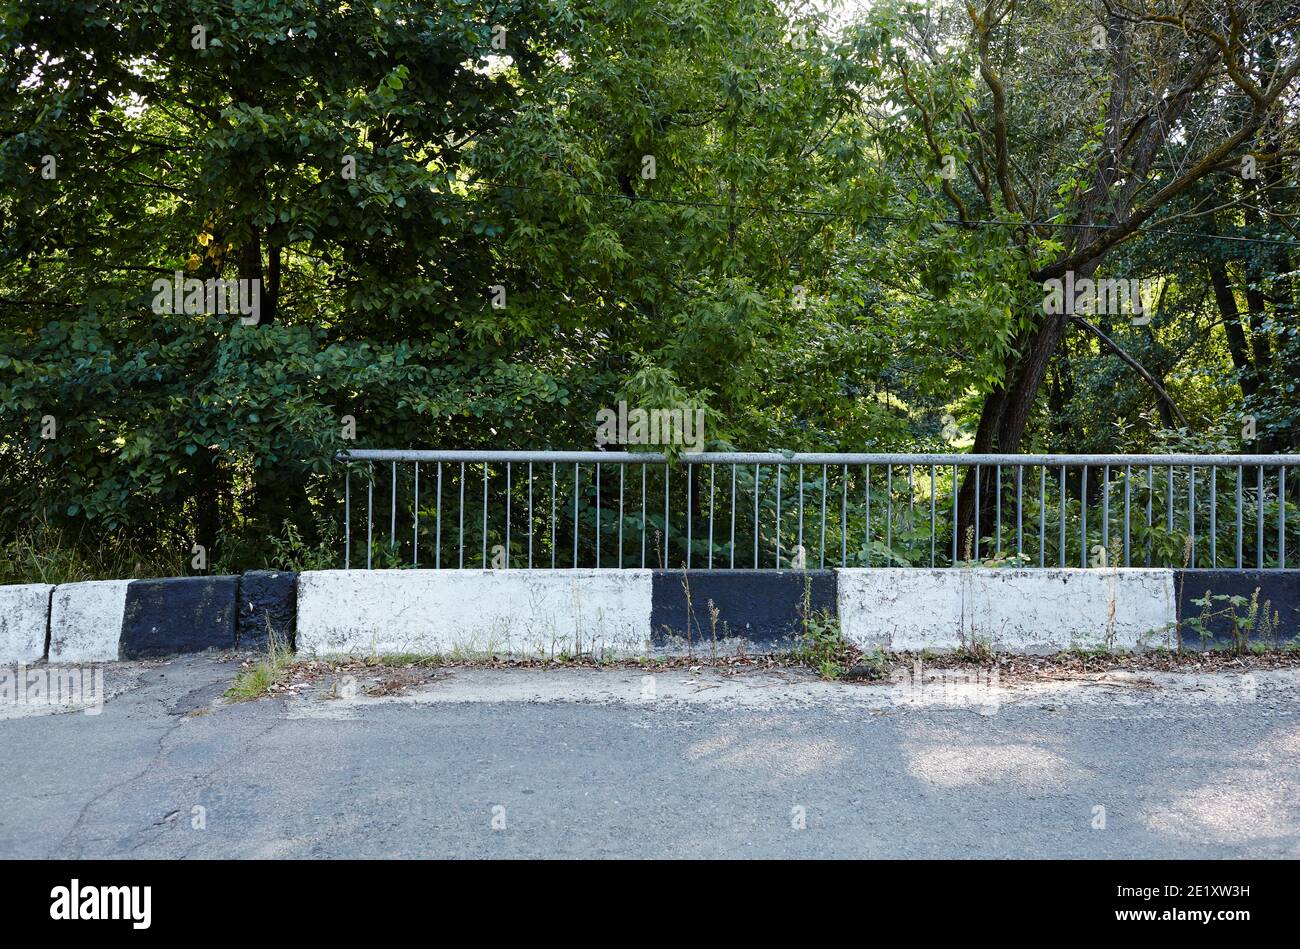 Barrier, designed to prevent the exit of the vehicle from the curb or bridge. Guarding rail on suburban road Stock Photo